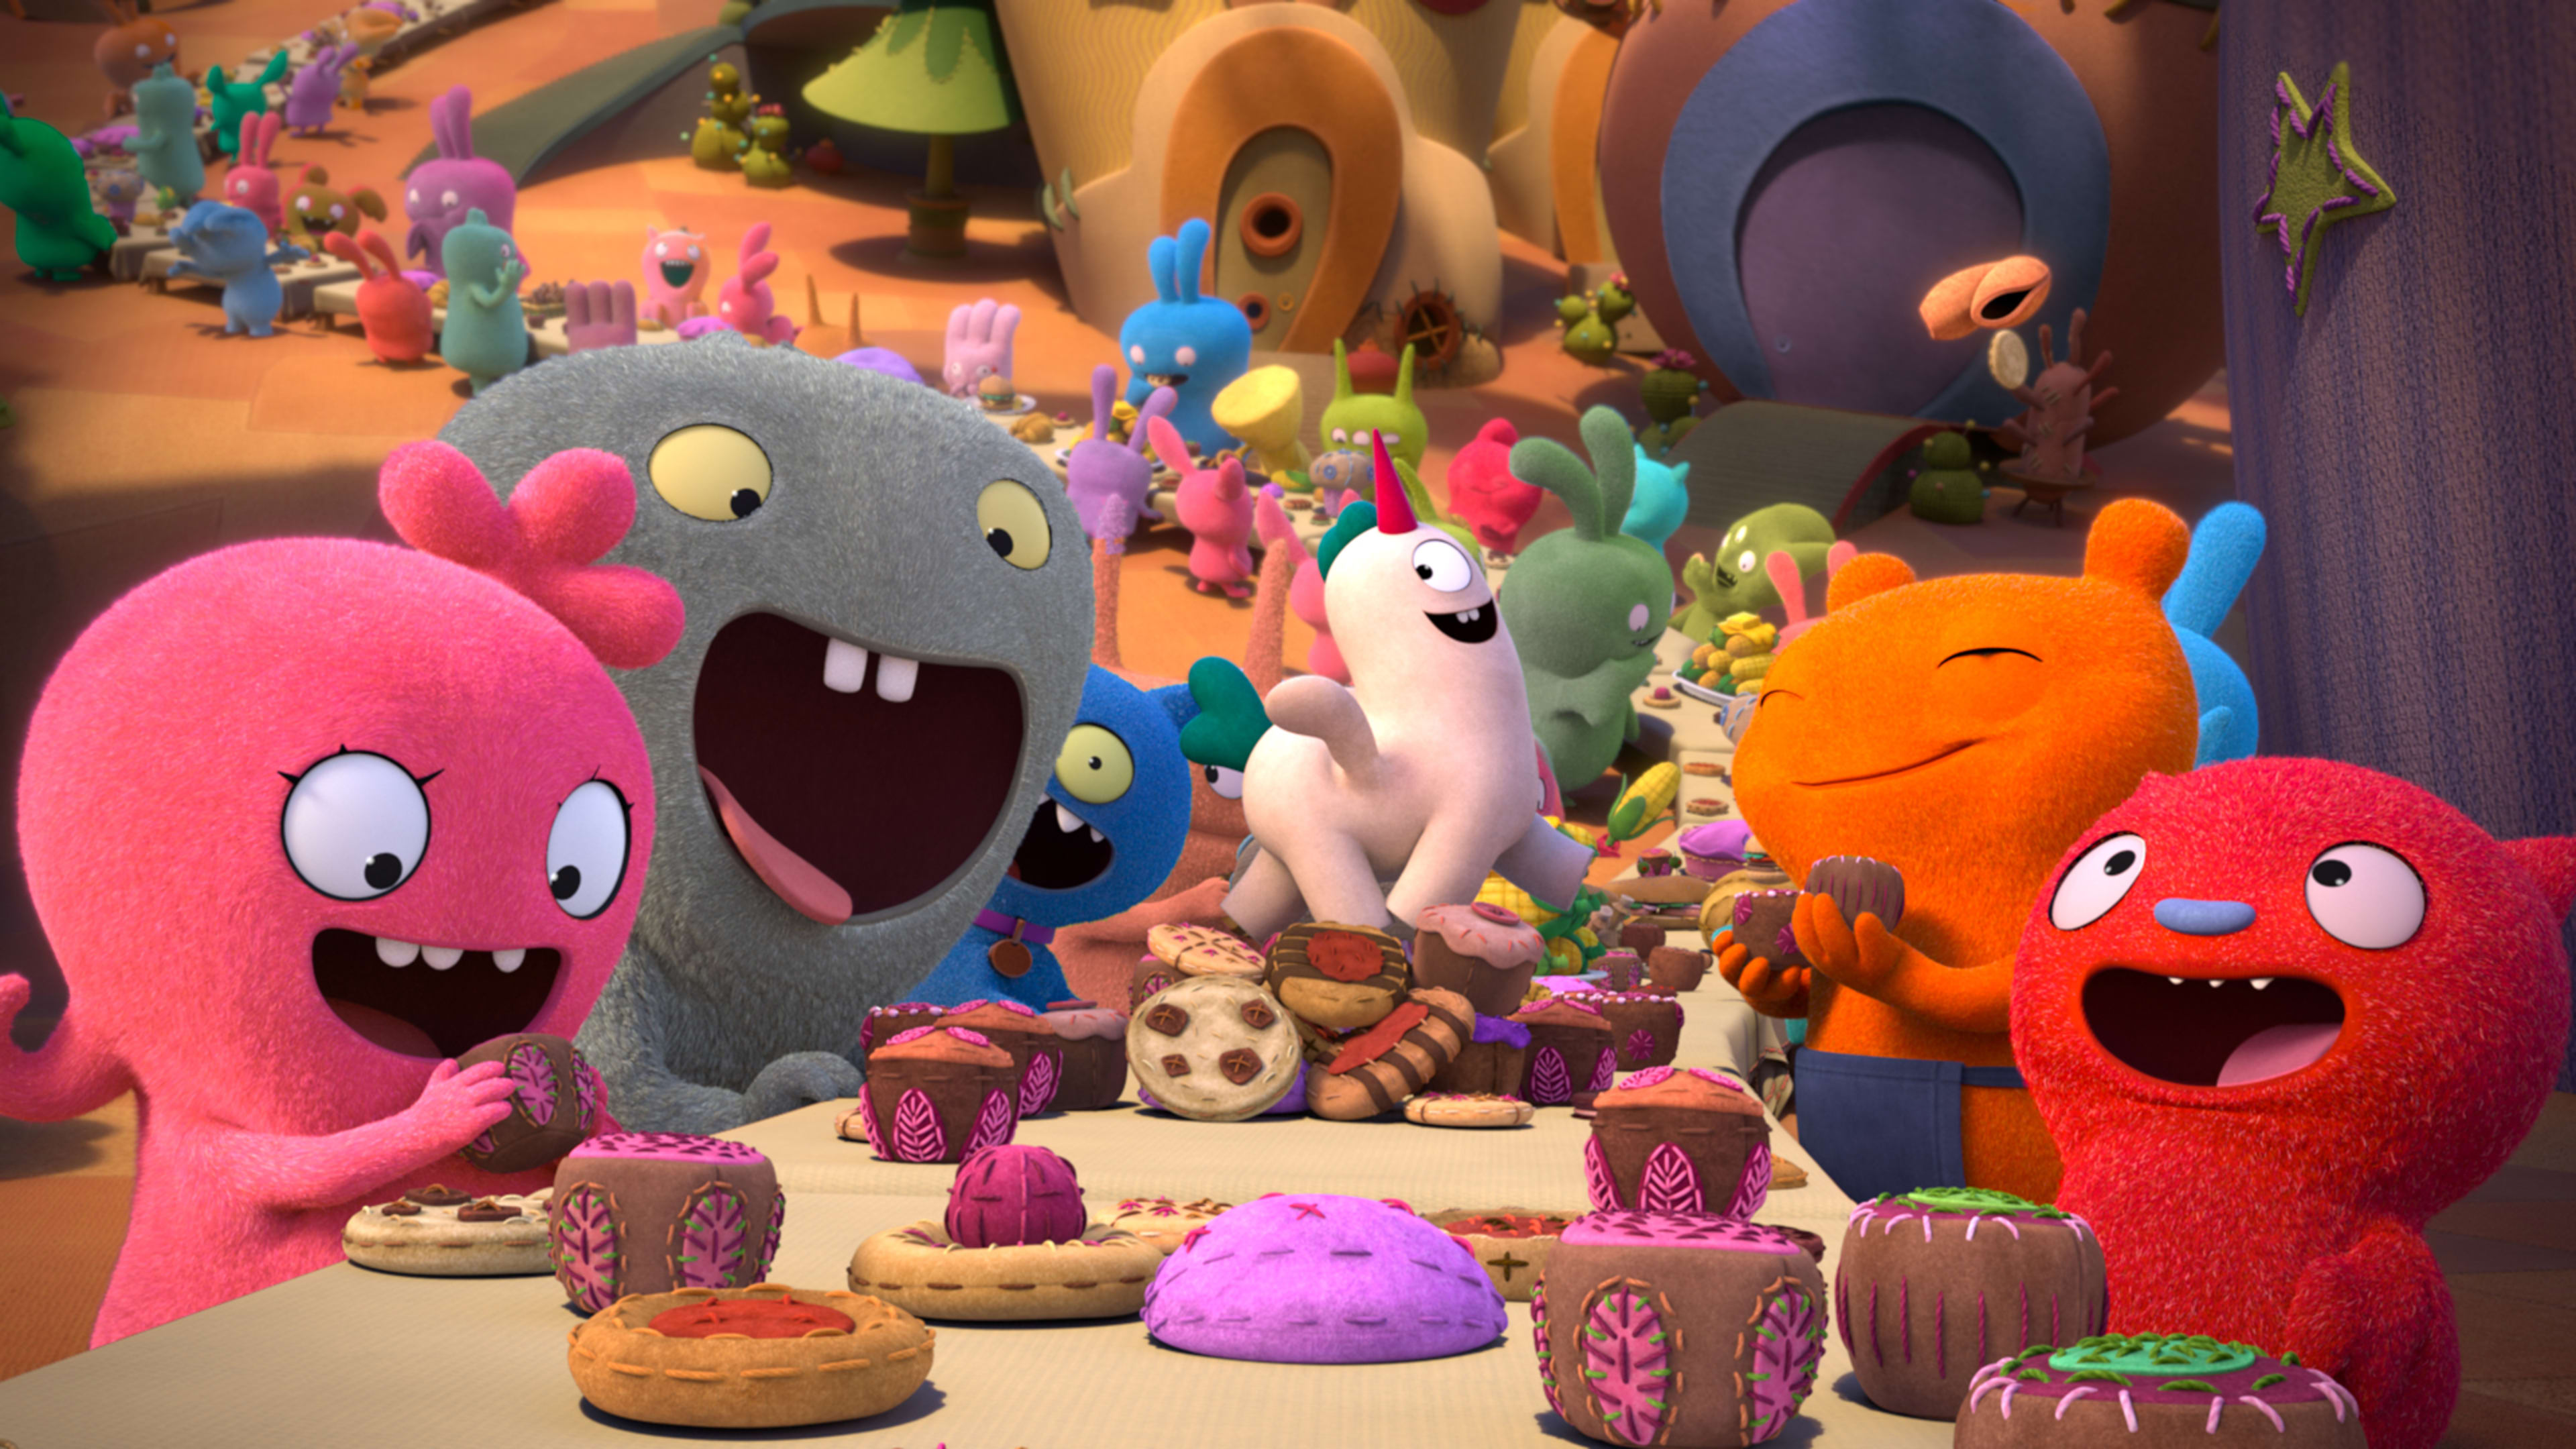 Why it took UglyDolls nearly 20 years to journey from specialty toy shops to the big screen